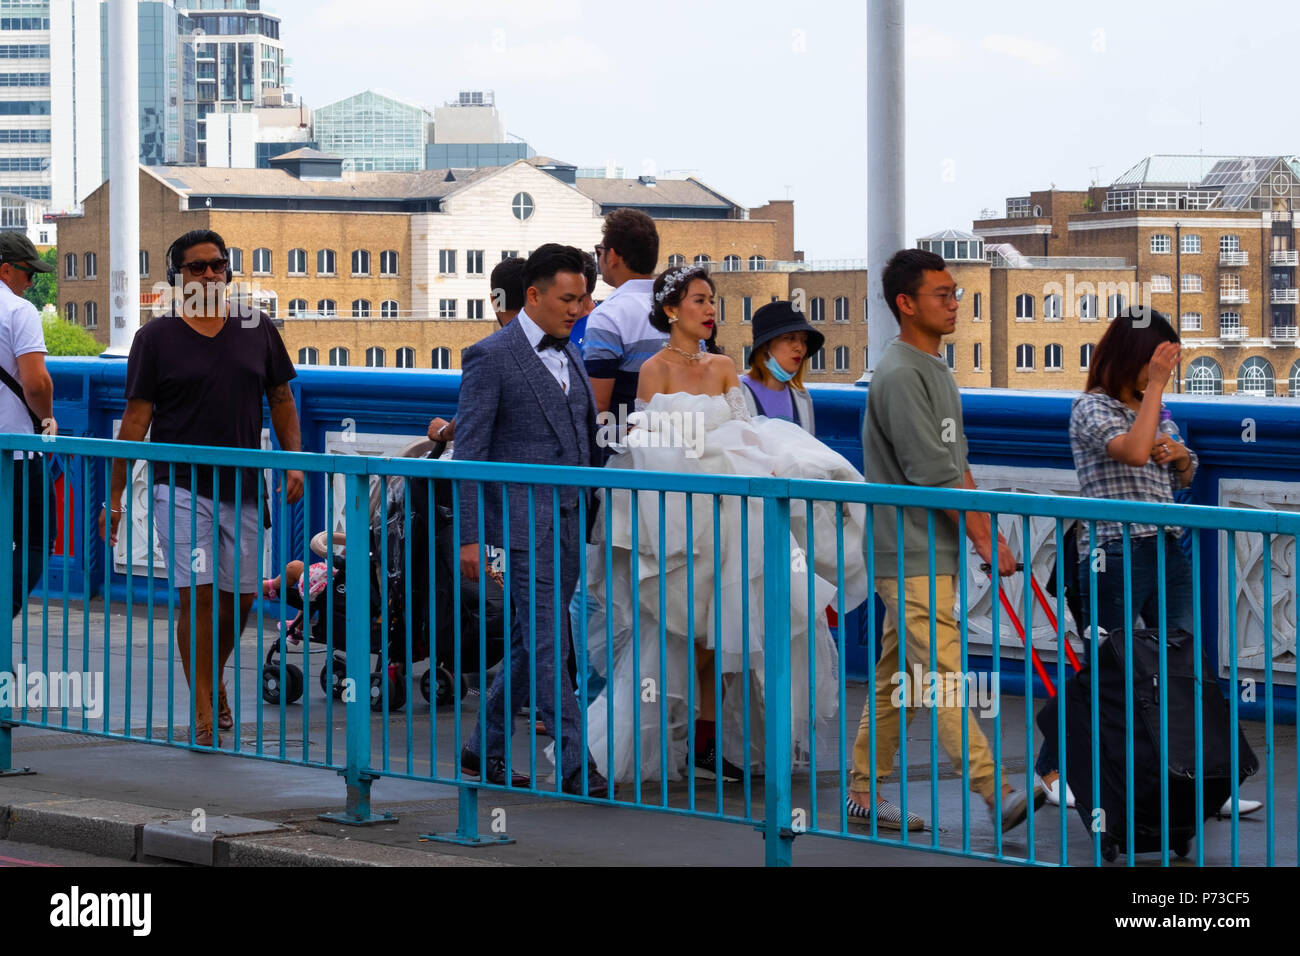 London, England. 4th July 2018. A couple have their wedding photos taken on London's Tower Bridge among all the tourists on another very hot day. The present heatwave is set to continue. ©Tim Ring/Alamy Live News Stock Photo